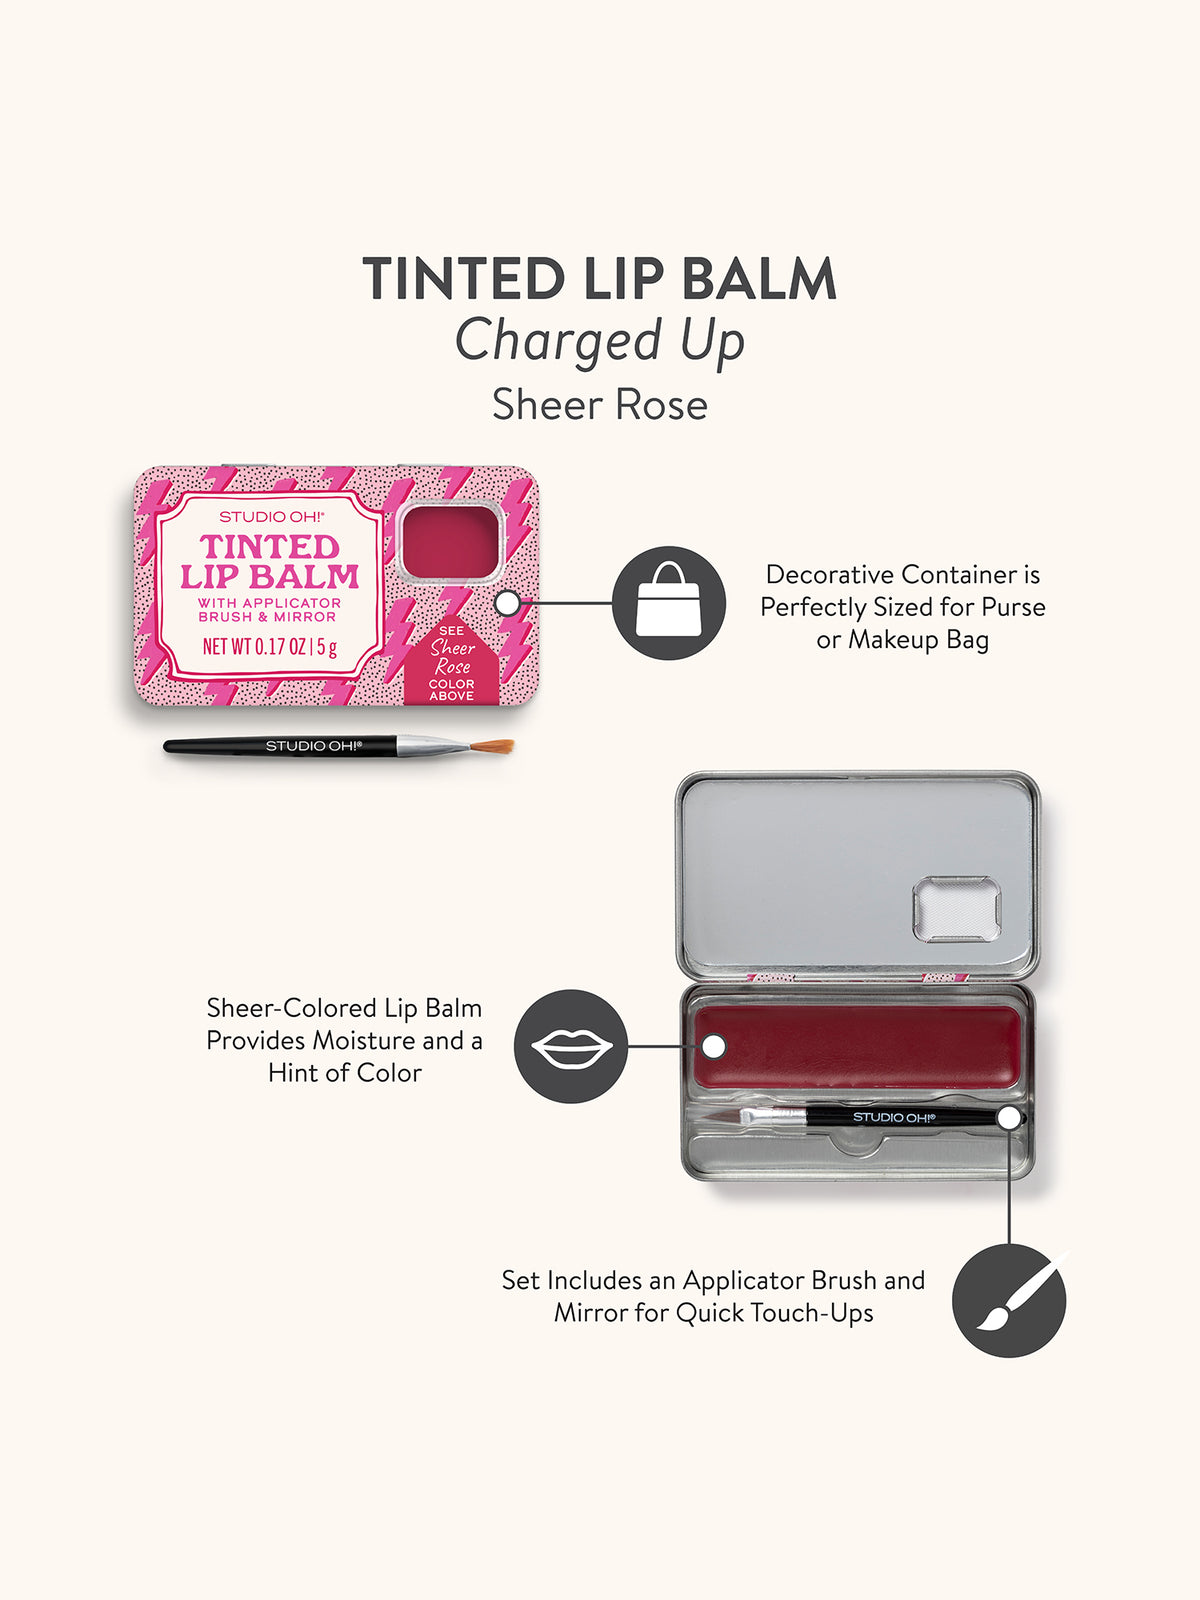 Charged Up Tinted Lip Balm